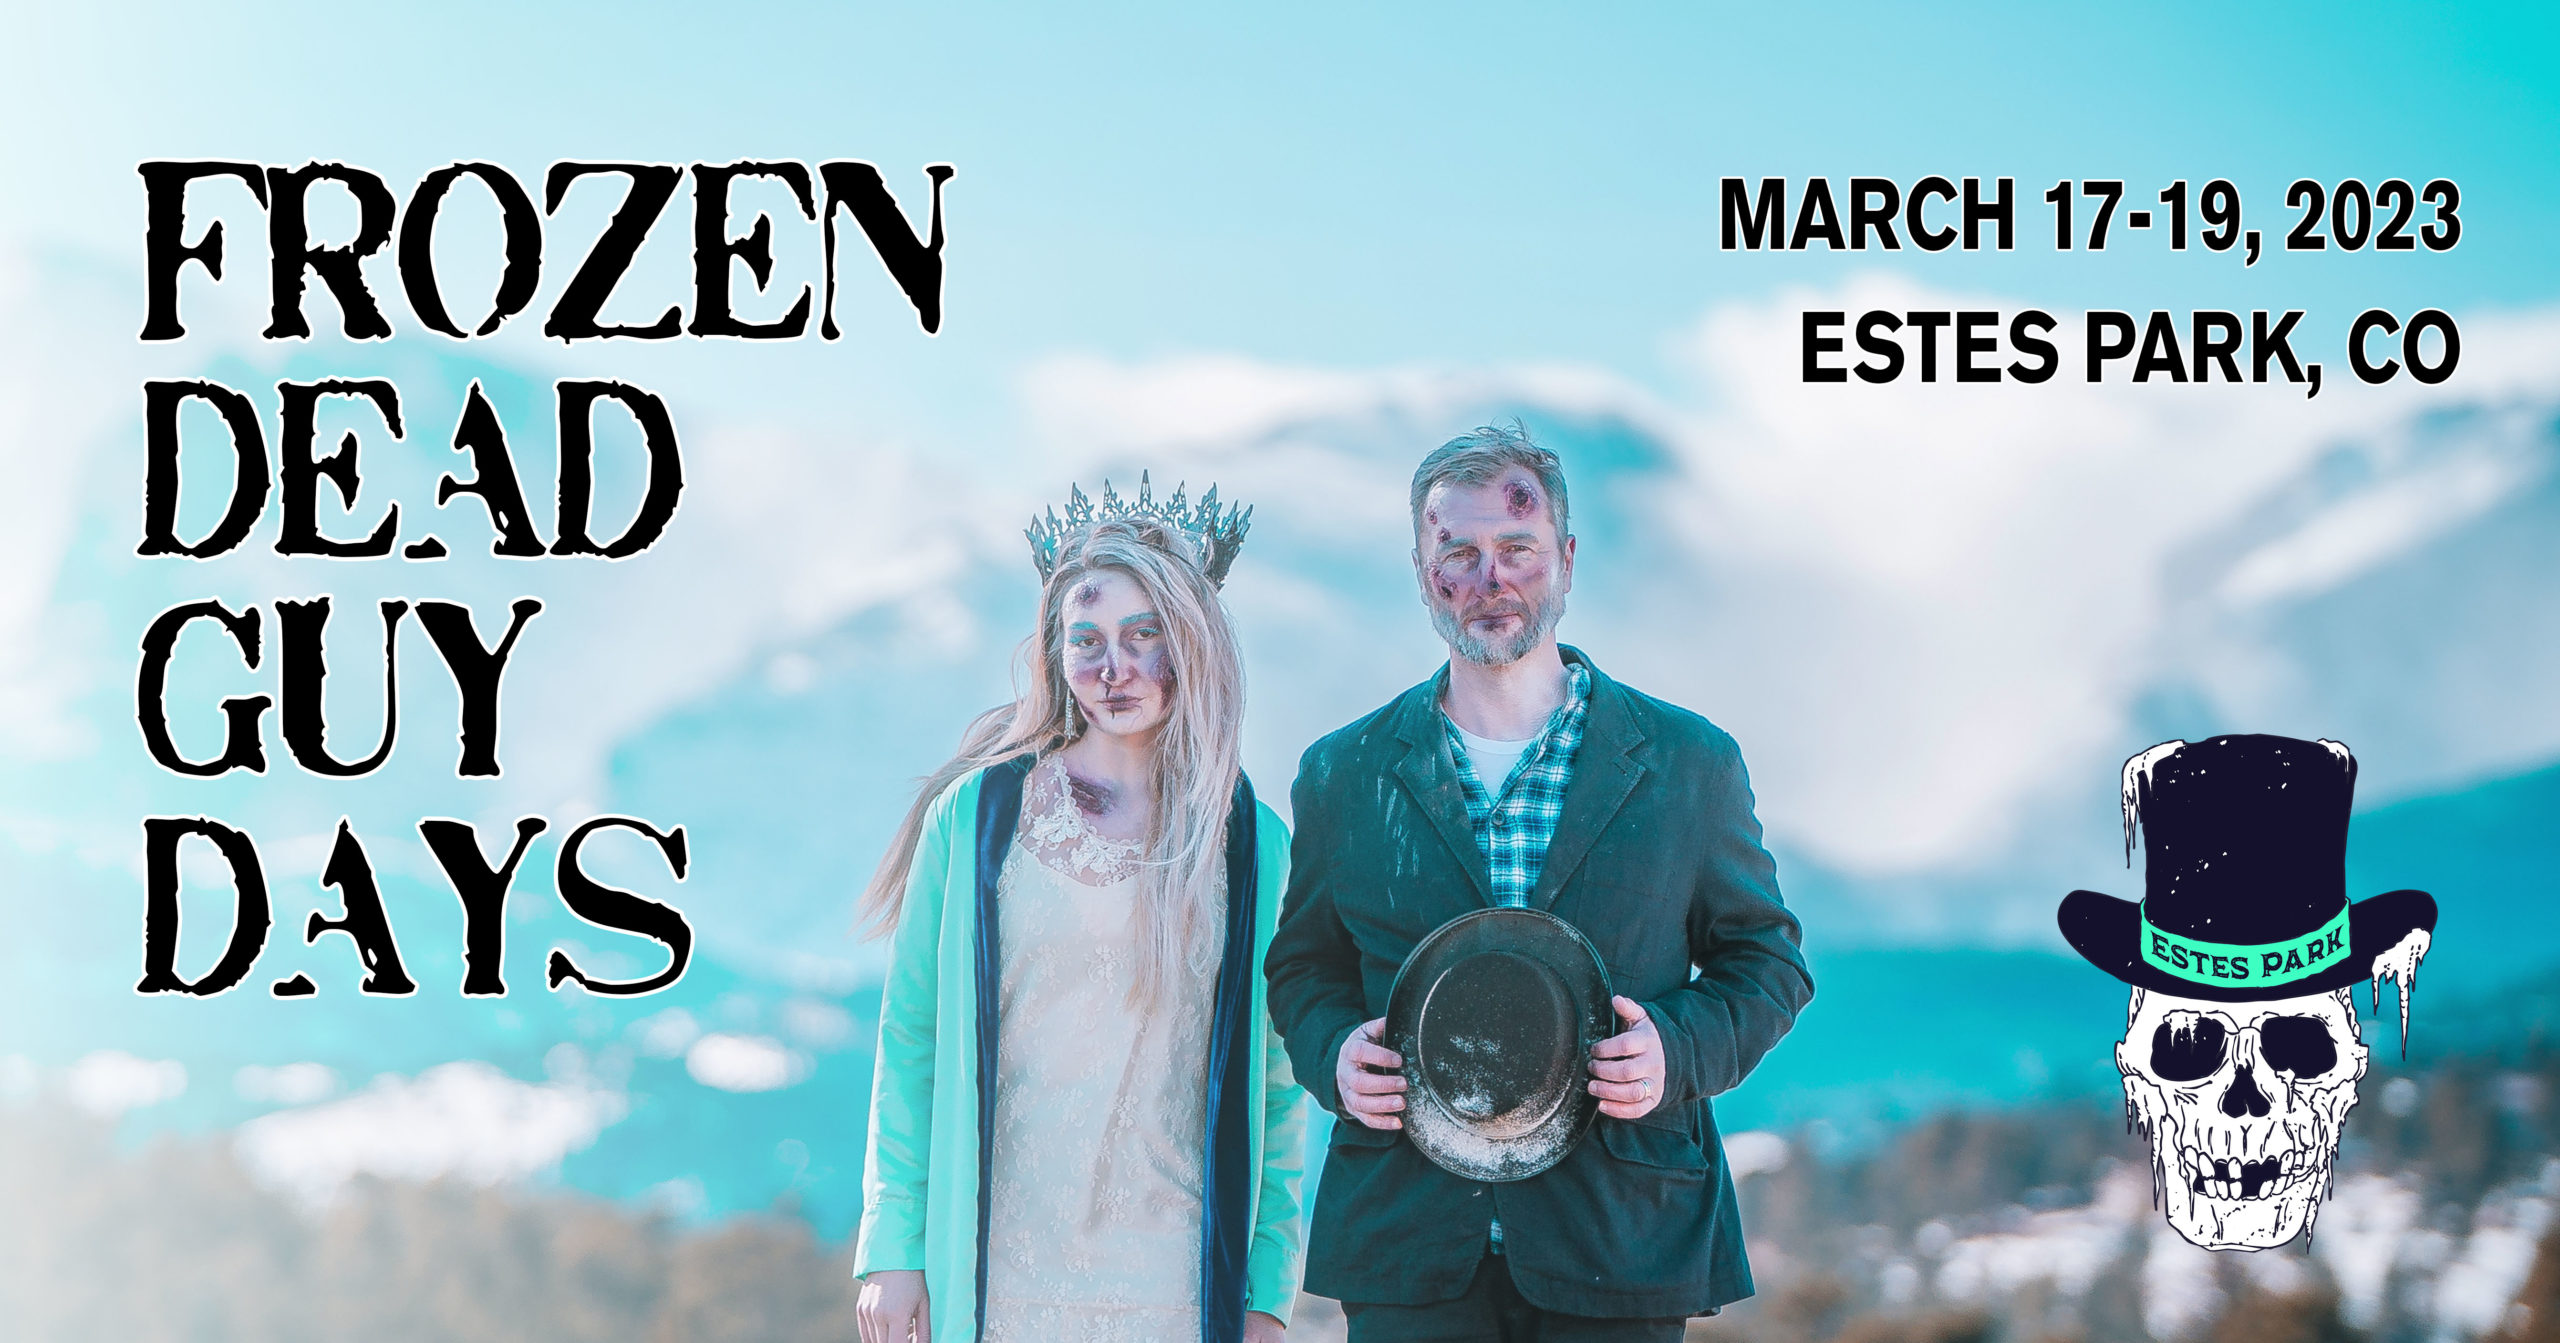 Don’t Miss Out on “Frozen Dead Guy Days” in Estes Park This March!